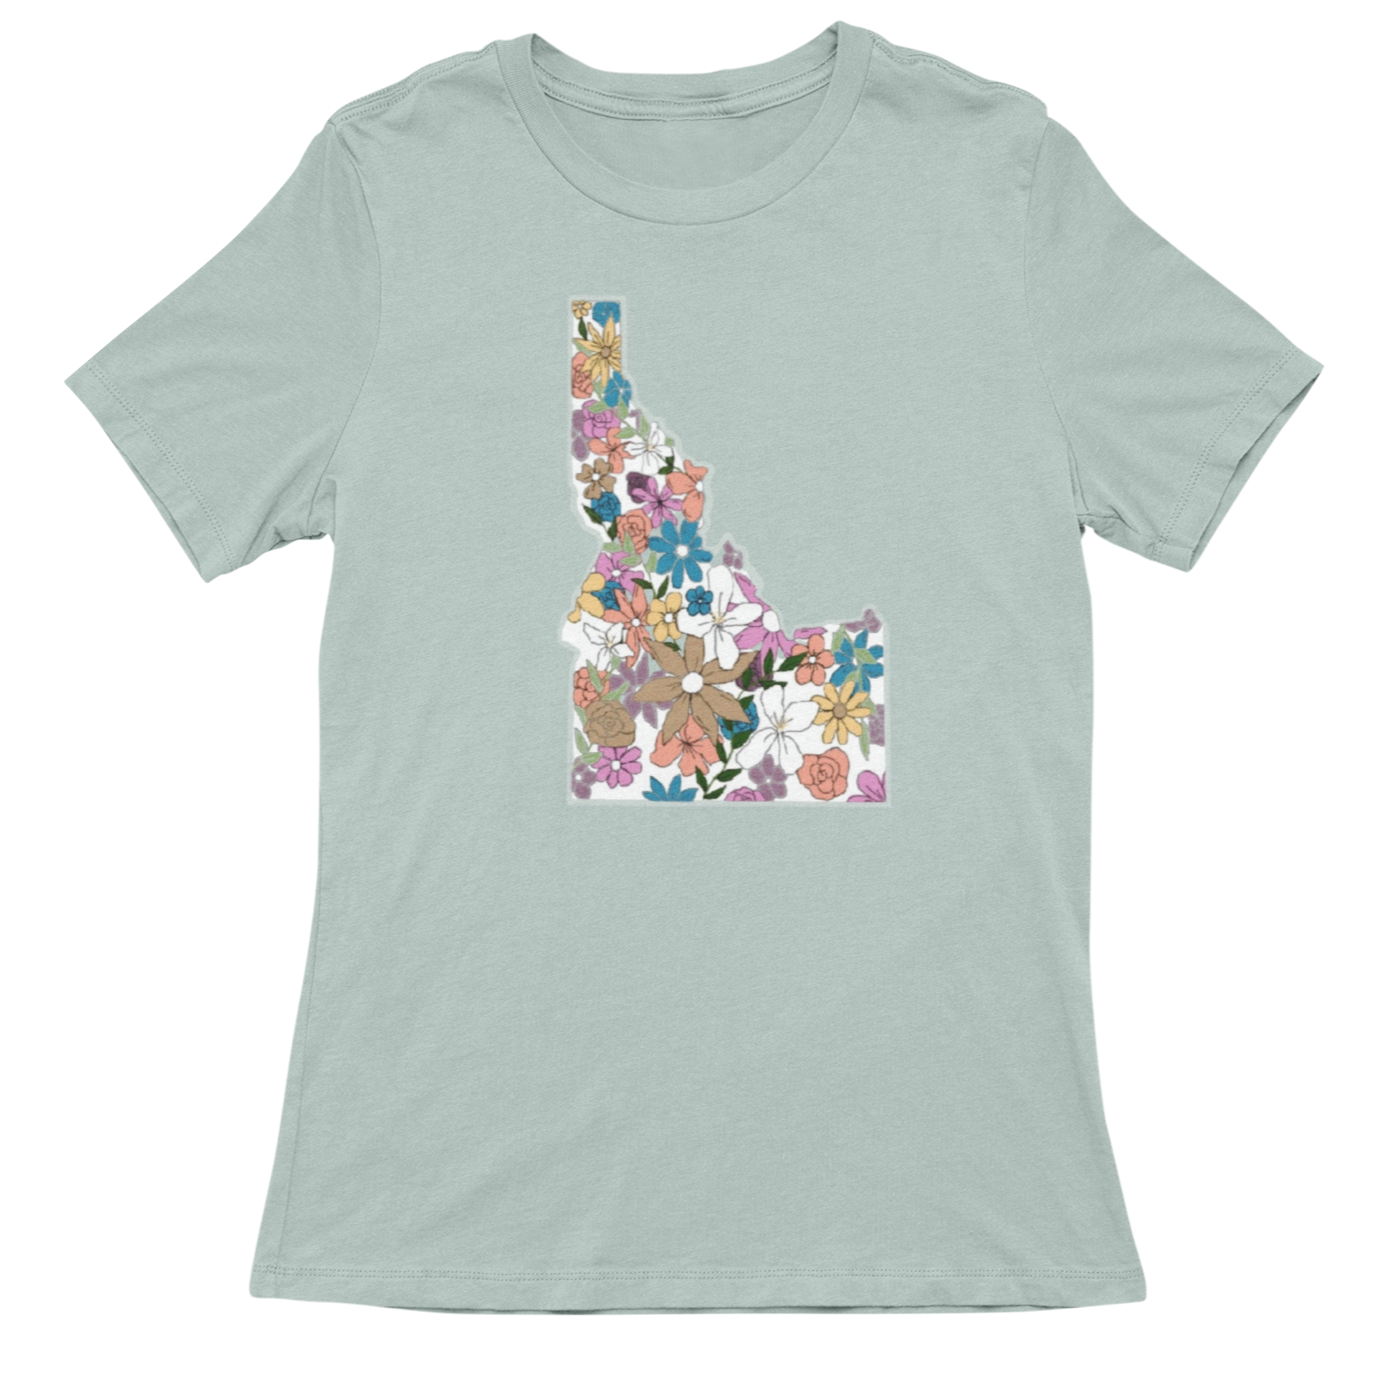 208 Supply Co Small / Heather Prism Dusty Blue Idaho Spring Unisex Tee